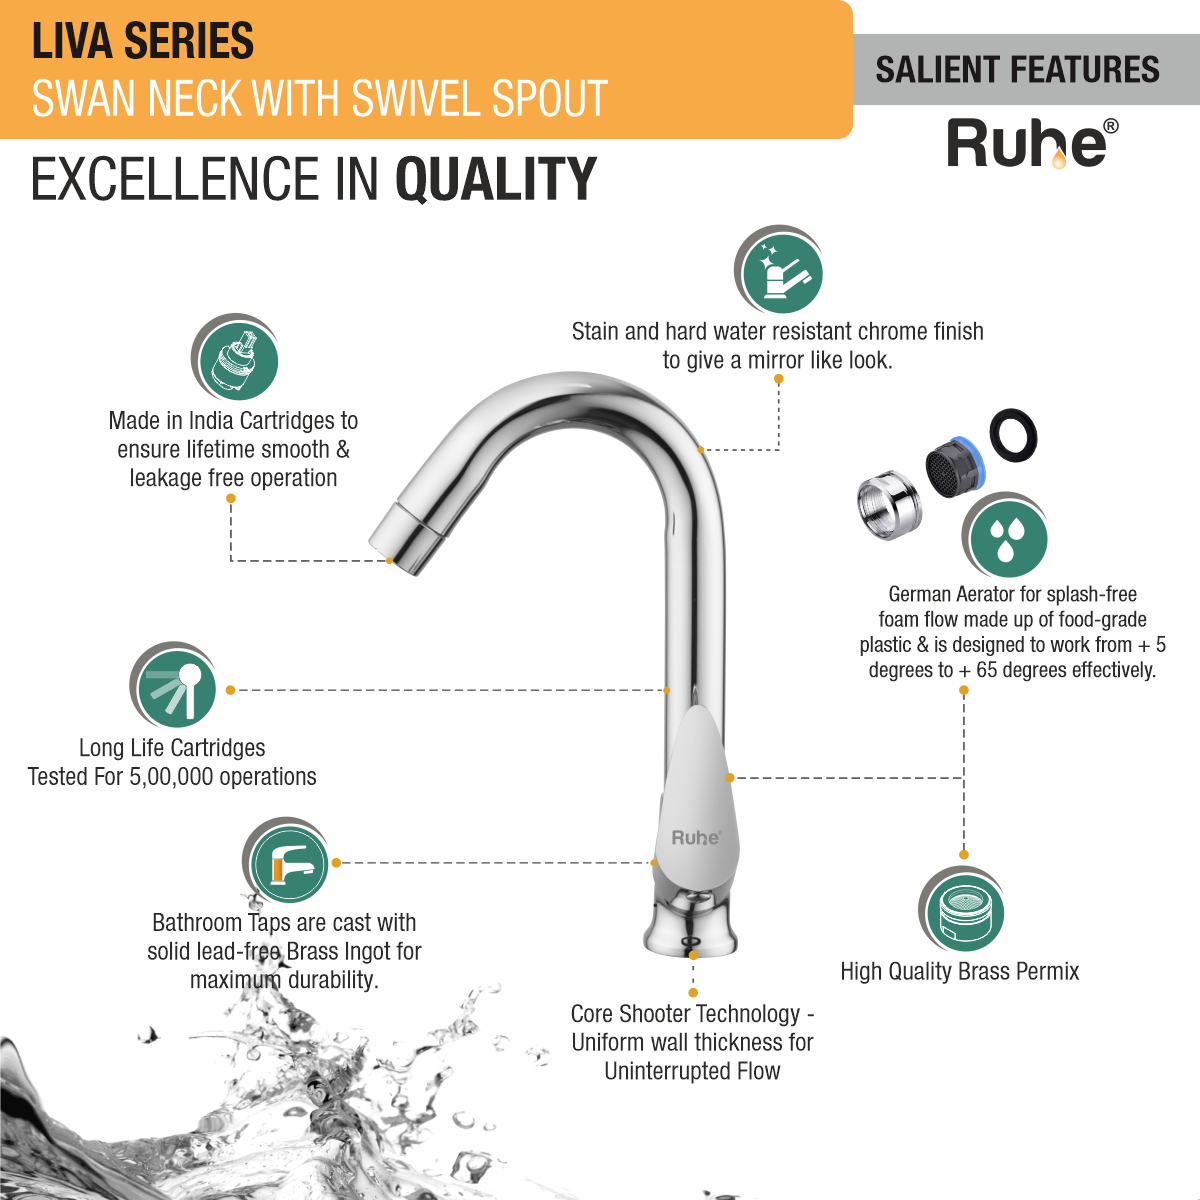 Liva Swan Neck with Swivel Spout Faucet features